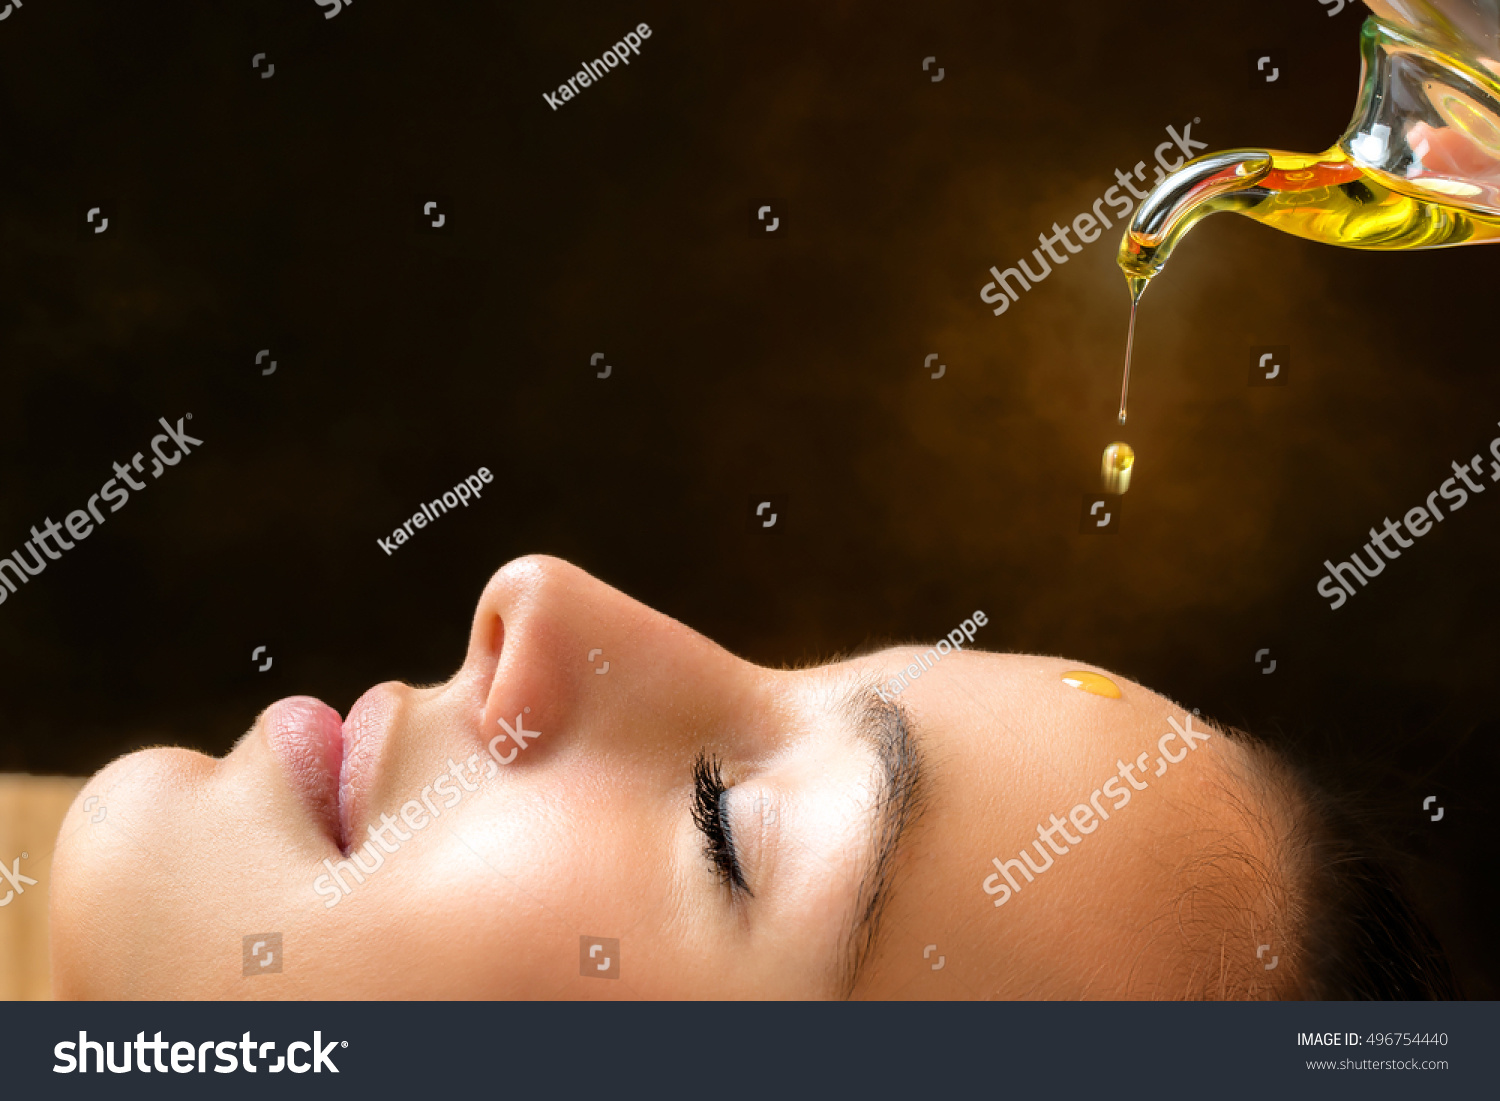 Macro close up portrait of young woman at ayurvedic massage session with aromatic oil dripping on face. #496754440